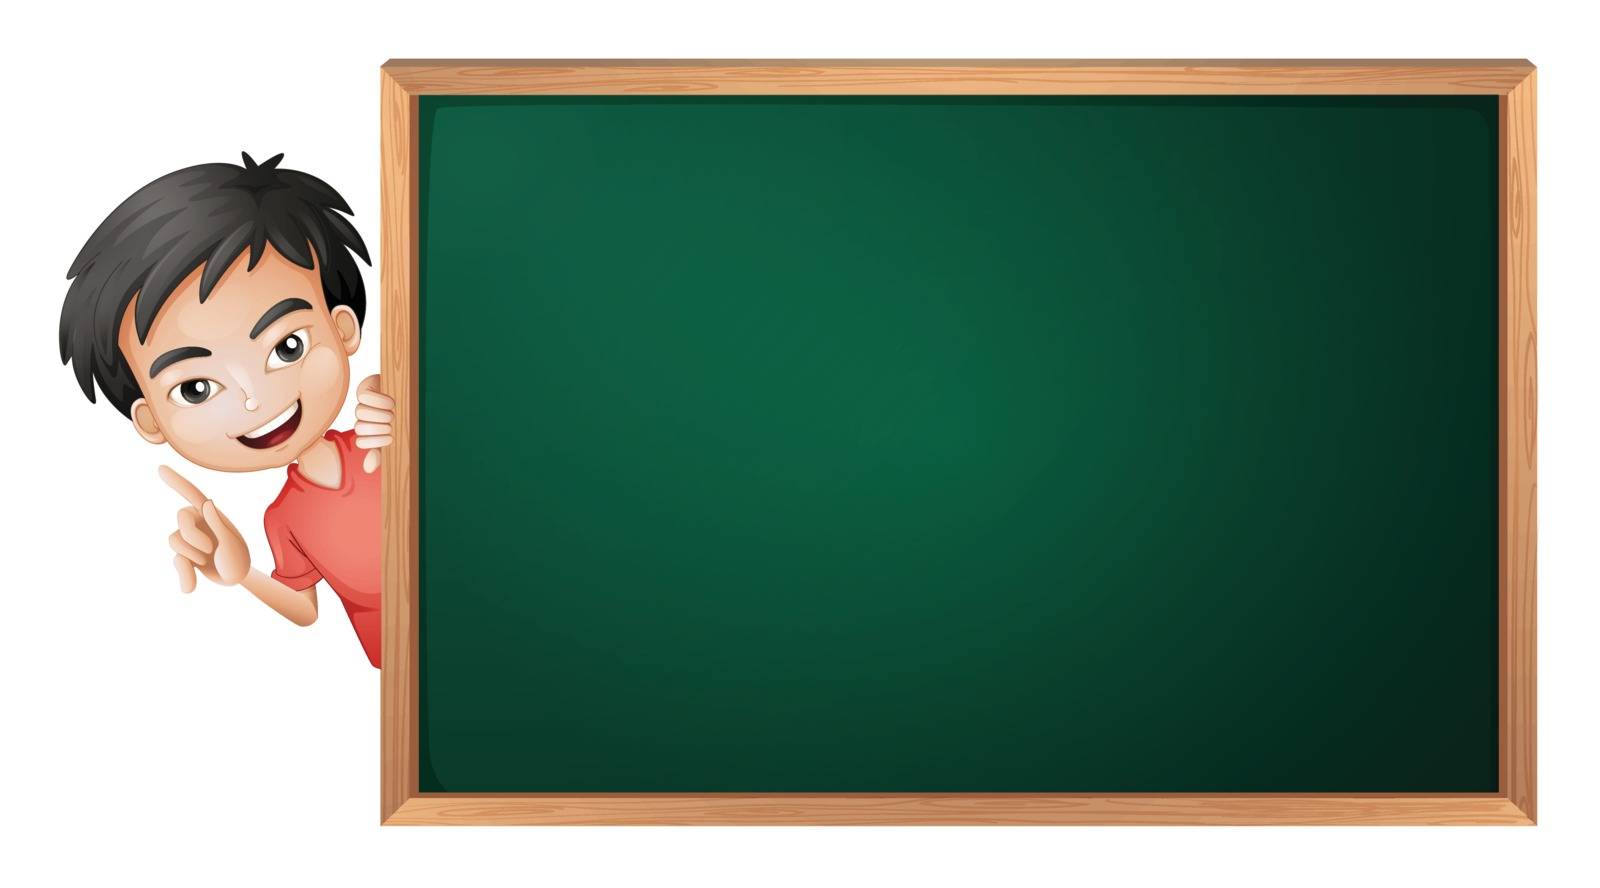 illustration of a boy and a green board on a white background